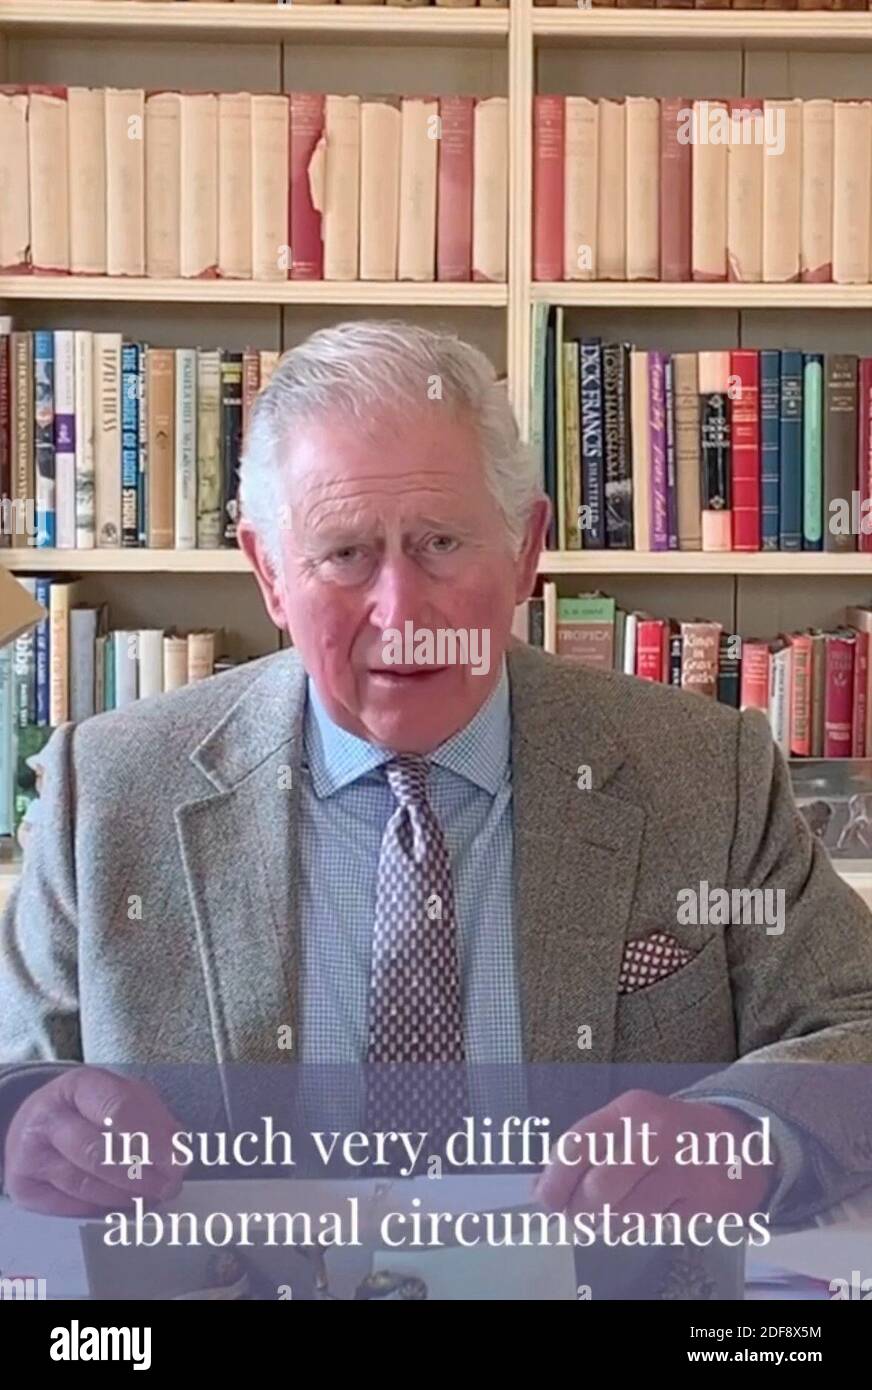 Screen grab from Clarence House Twitter account. Prince Charles is finally out of self-isolation after contracting COVID-19. On Tuesday March 31, 2020, he addressed the nation and opened up about the novel coronavirus pandemic through a video that he recorded at his Scotland home where he is residing with his wife Camilla, Duchess of Cornwall. Prince of Wales shared the video on his official Twitter account Clarence House. In the video, the prince talked about coronavirus pandemic and its impact on elders. In his message, he even announced that he is feeling much better after suffering from mi Stock Photo